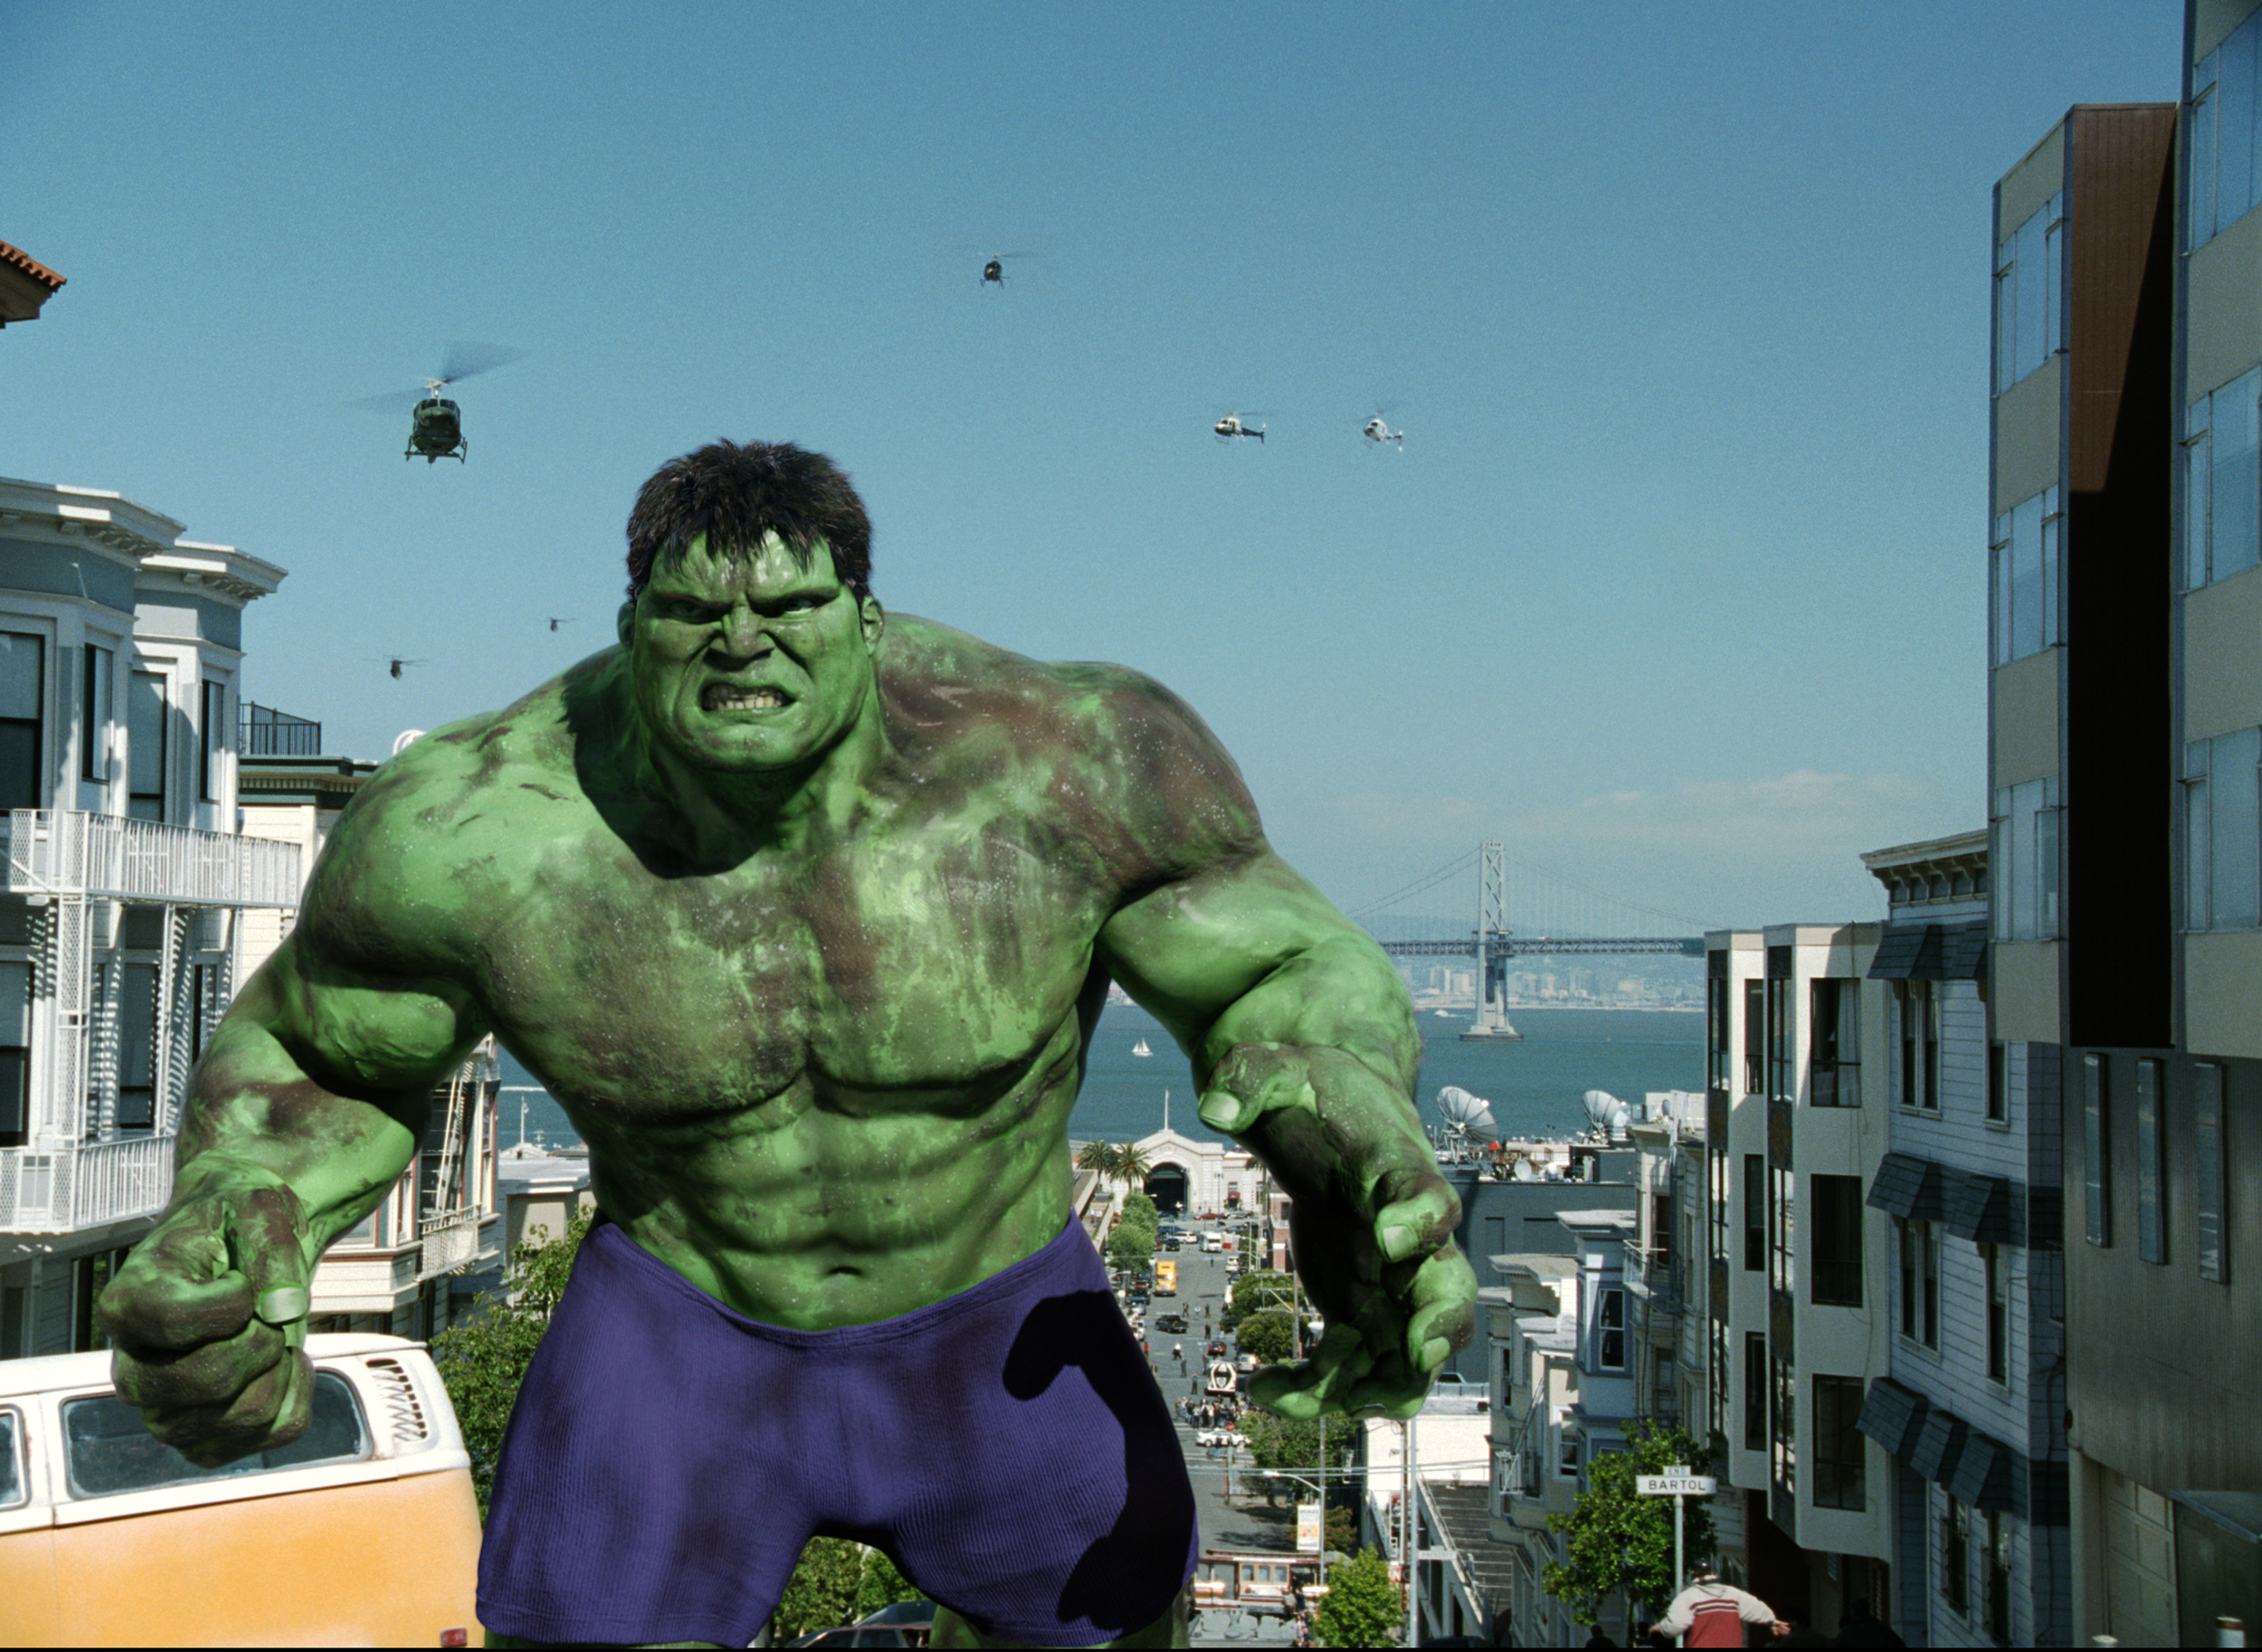 <p>In 1990, the last <em>Incredible Hulk</em> TV movie based on the 1970s show aired. That same year, producers Avi Arad and Gale Anne Hurd started developing a movie featuring the Marvel character as well. It ended up at Universal in 1992, and stayed there throughout the production process.</p><p>You may also like: <a href='https://www.yardbarker.com/entertainment/articles/the_best_tv_shows_that_lasted_only_one_season_030624/s1__29844374'>The best TV shows that lasted only one season</a></p>